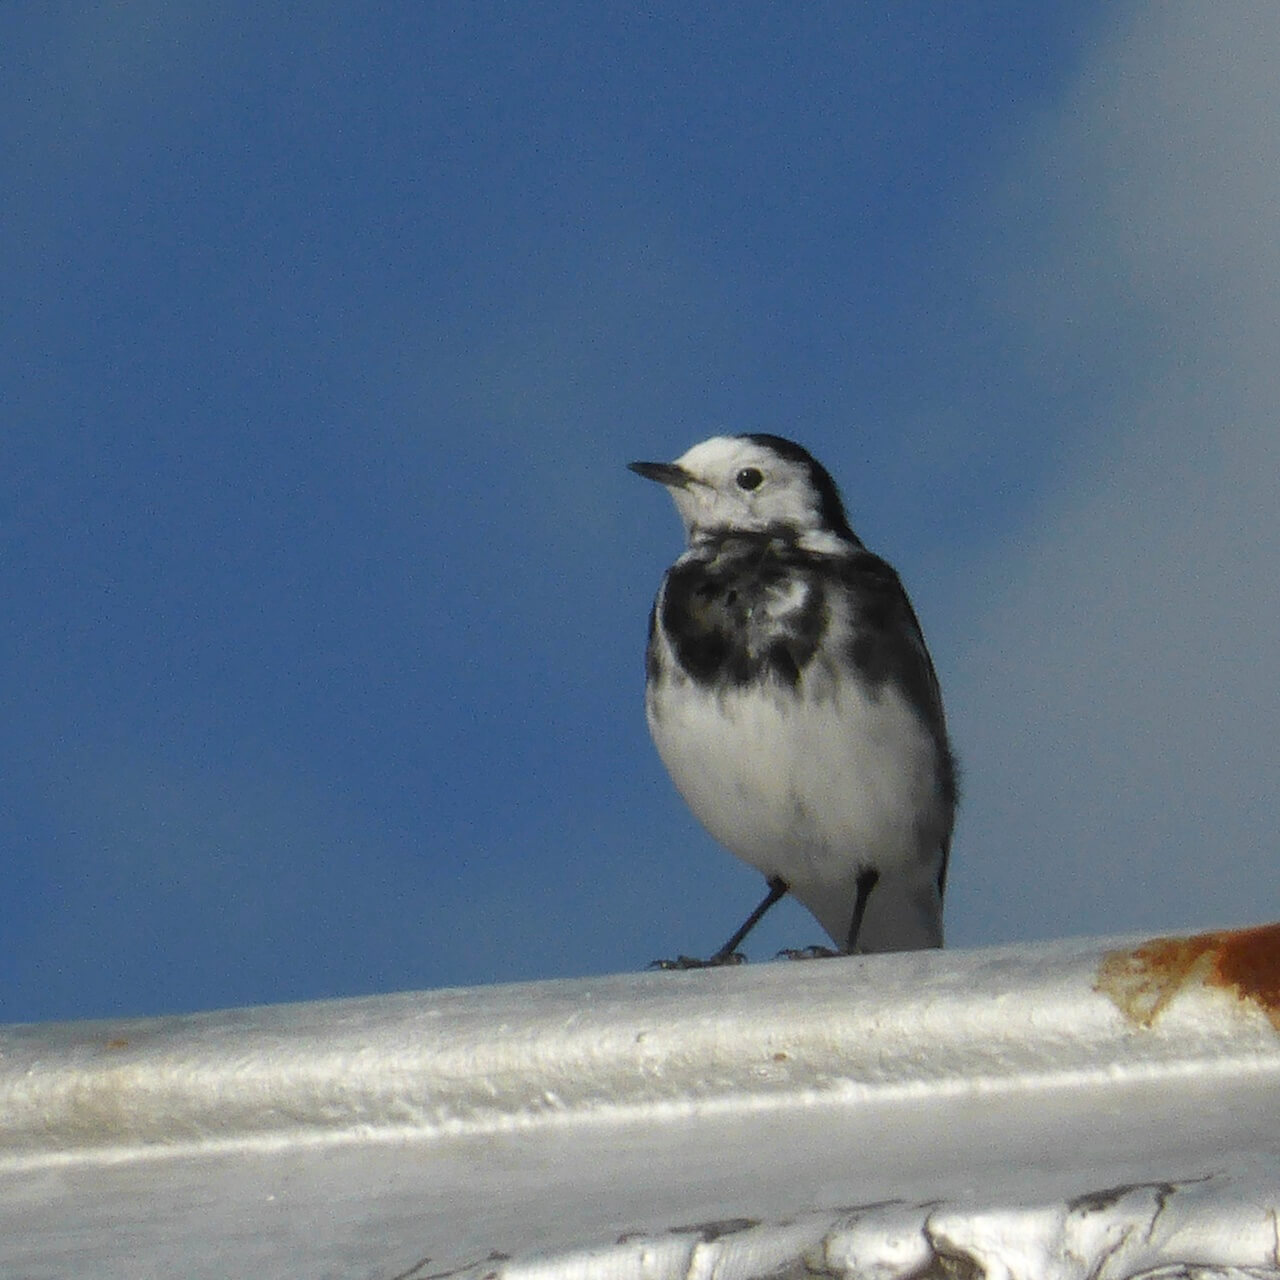 Wagtail bird pirched on a shed roof in Polbain